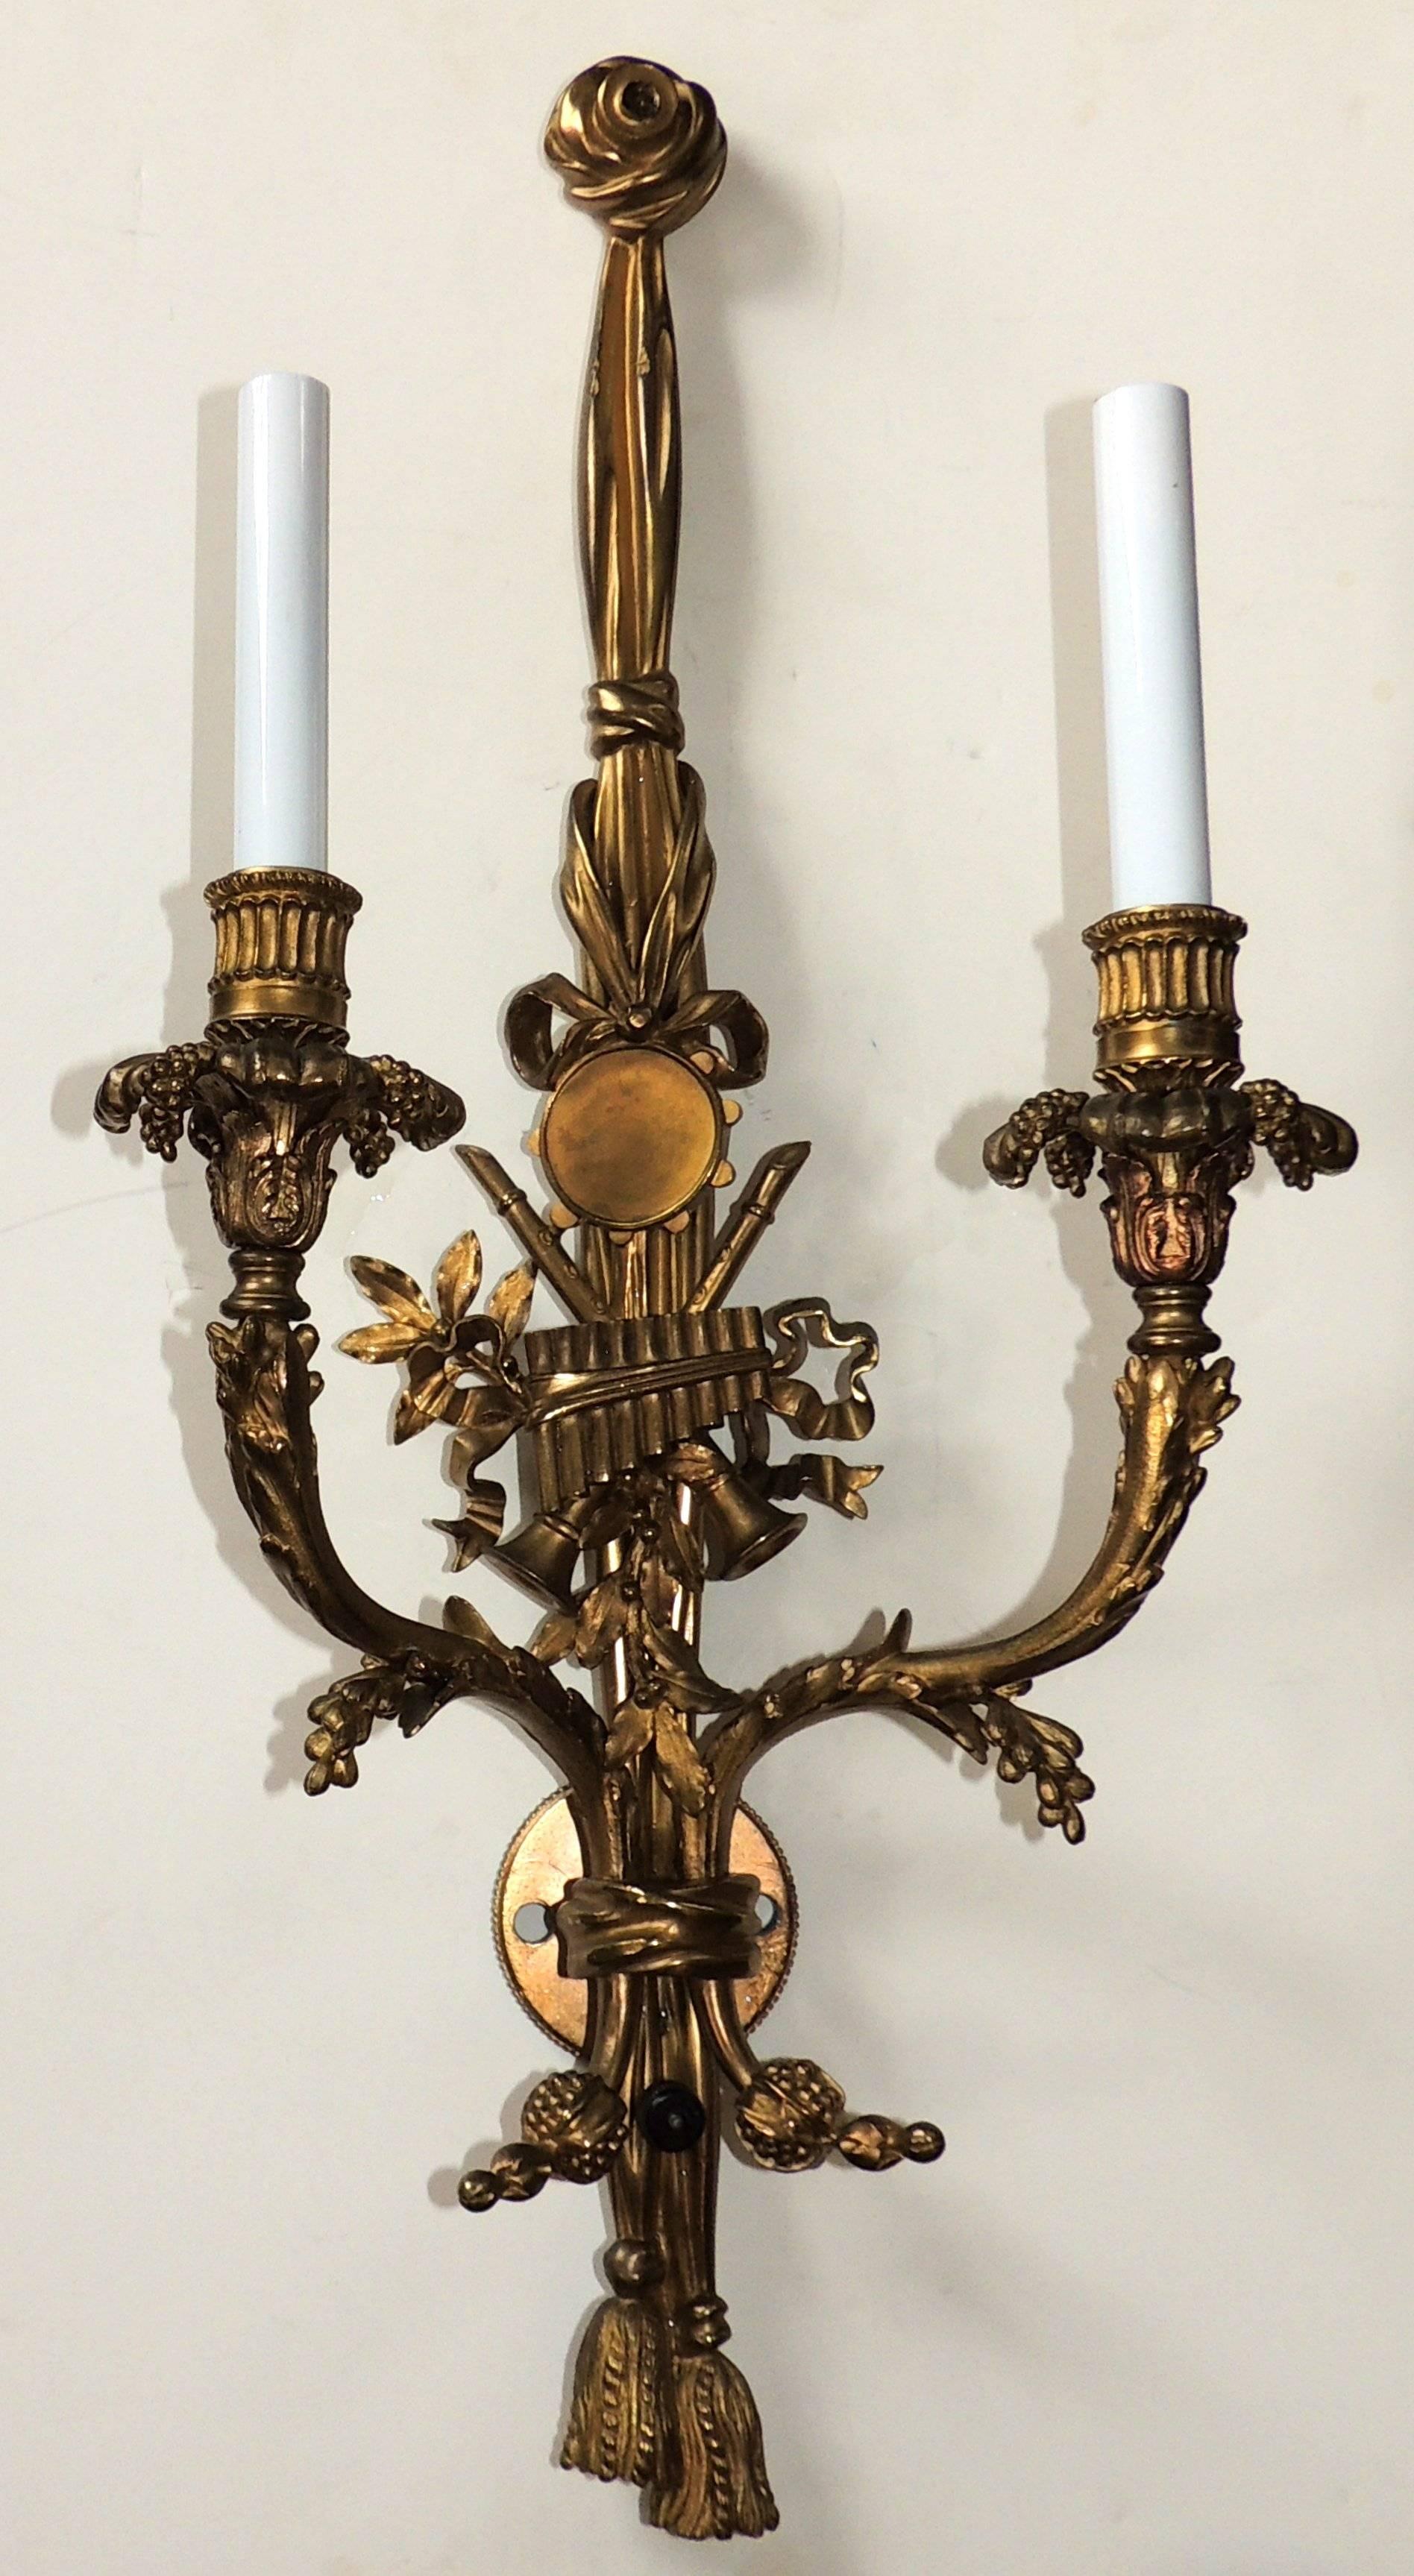 Outstanding Quality Pair Of French Gilt Bronze Musical Instrument & Tassel Floral Sconces.

Measures: 26